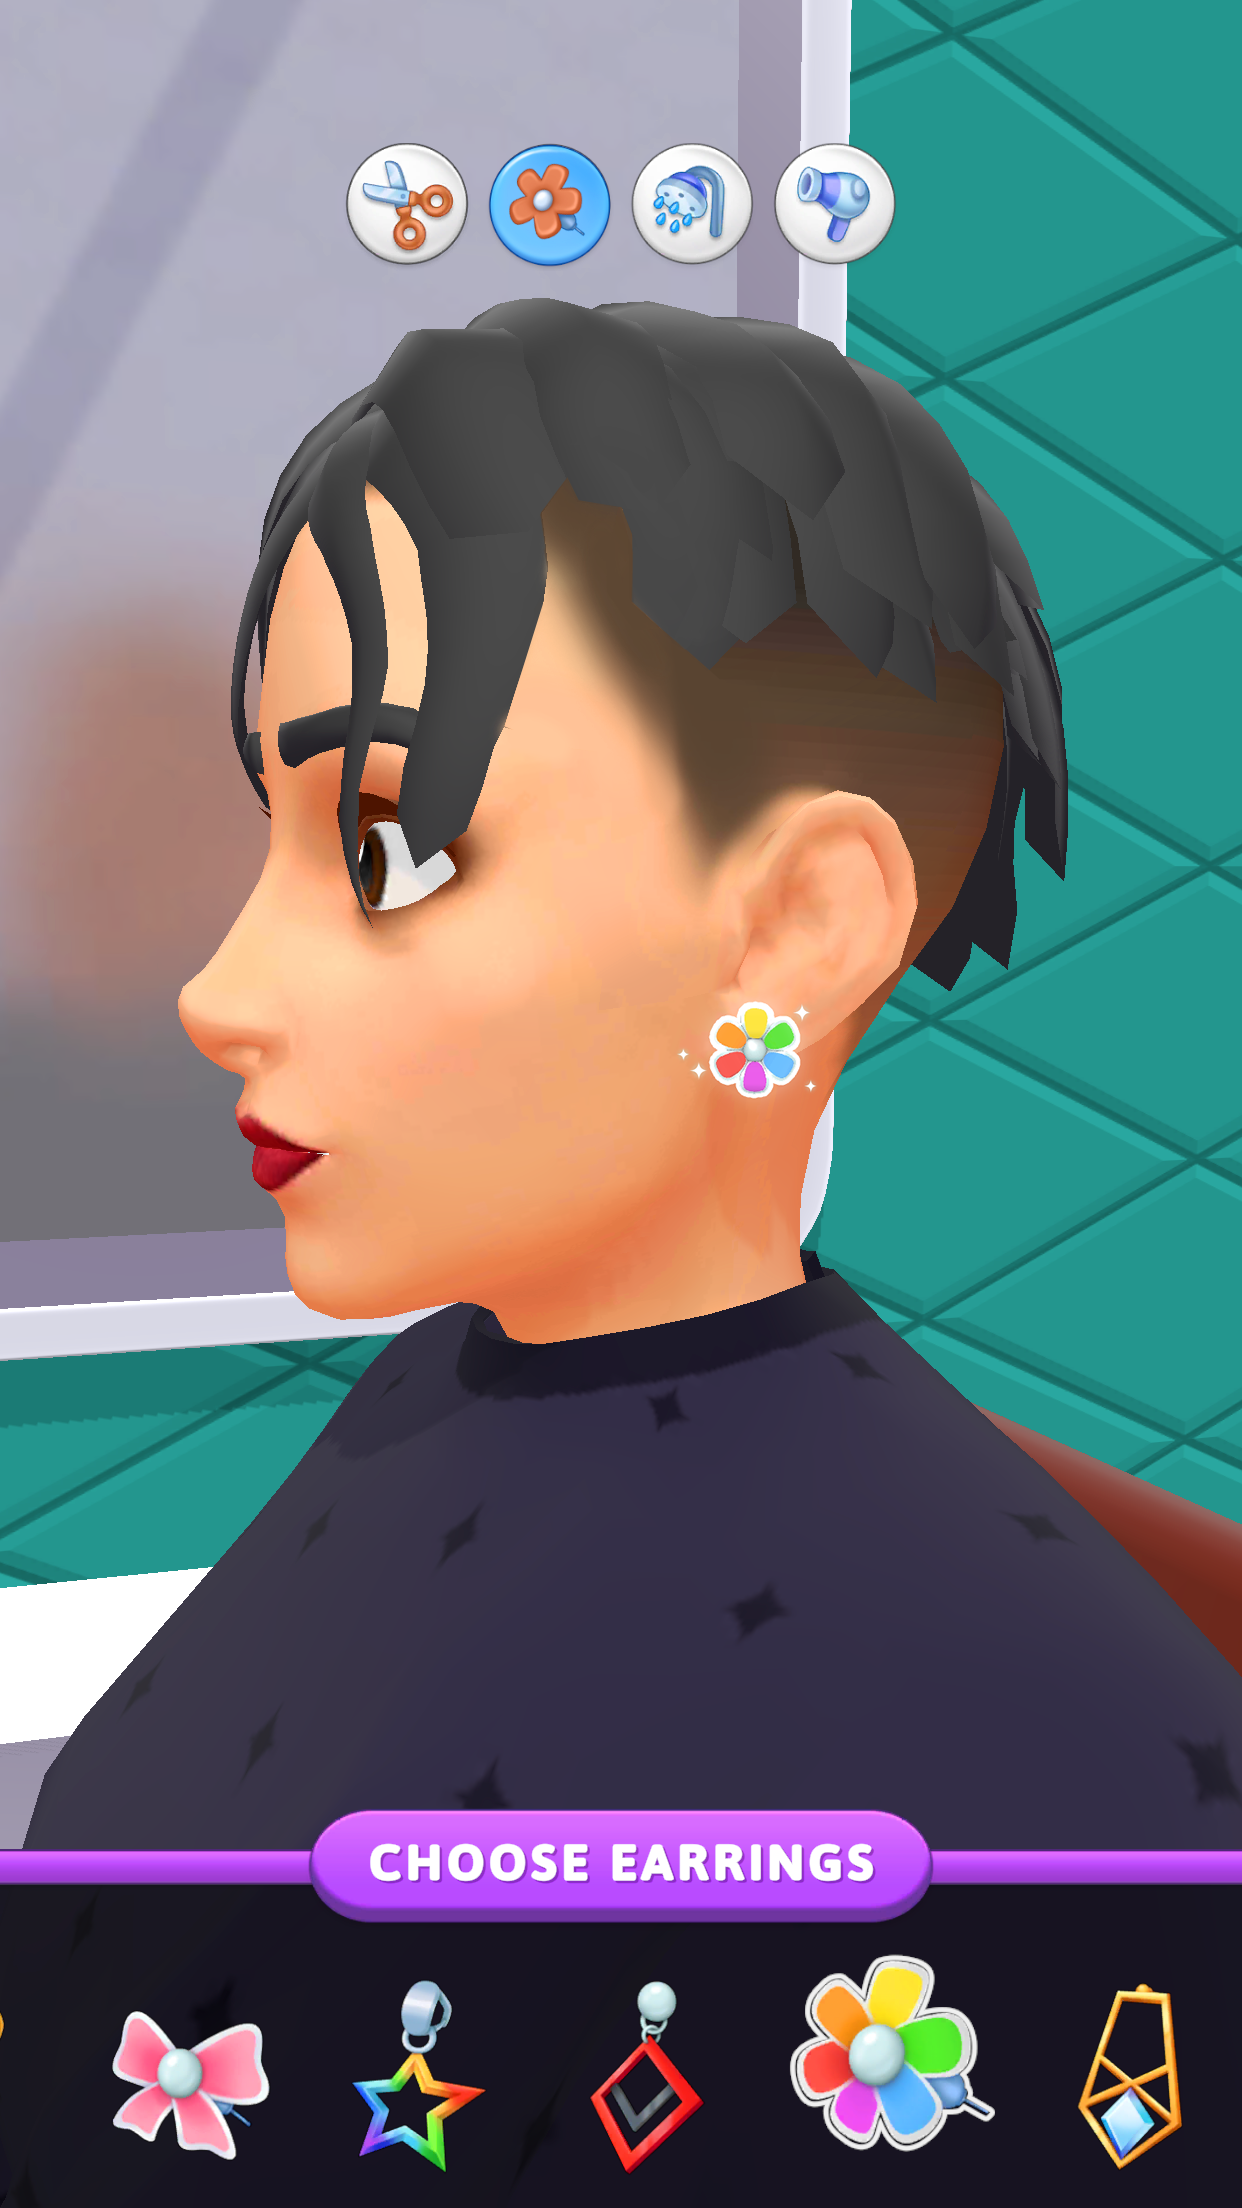 Hair Tattoo: Barber Salon Game Apk Download for Android- Latest